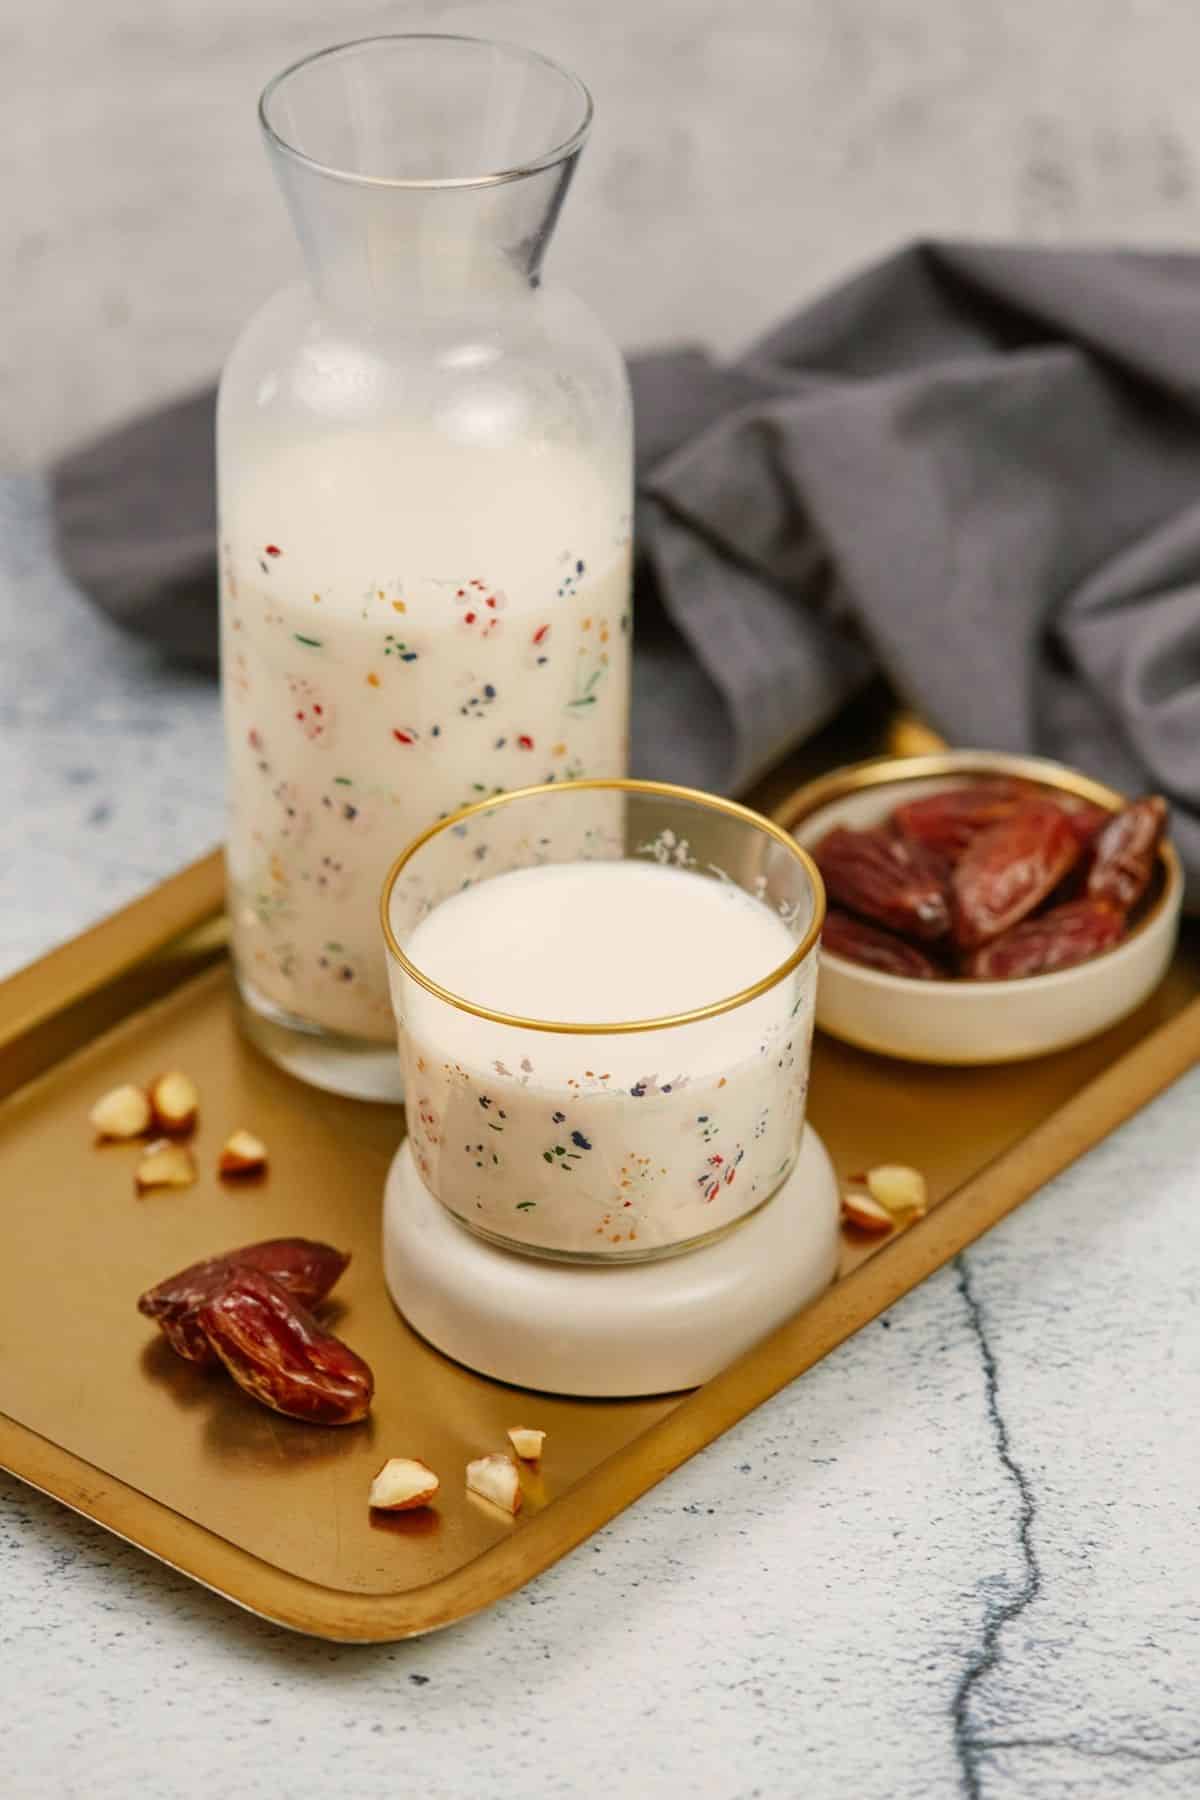 wood platter holding almonds next to a glass cup of almond milk